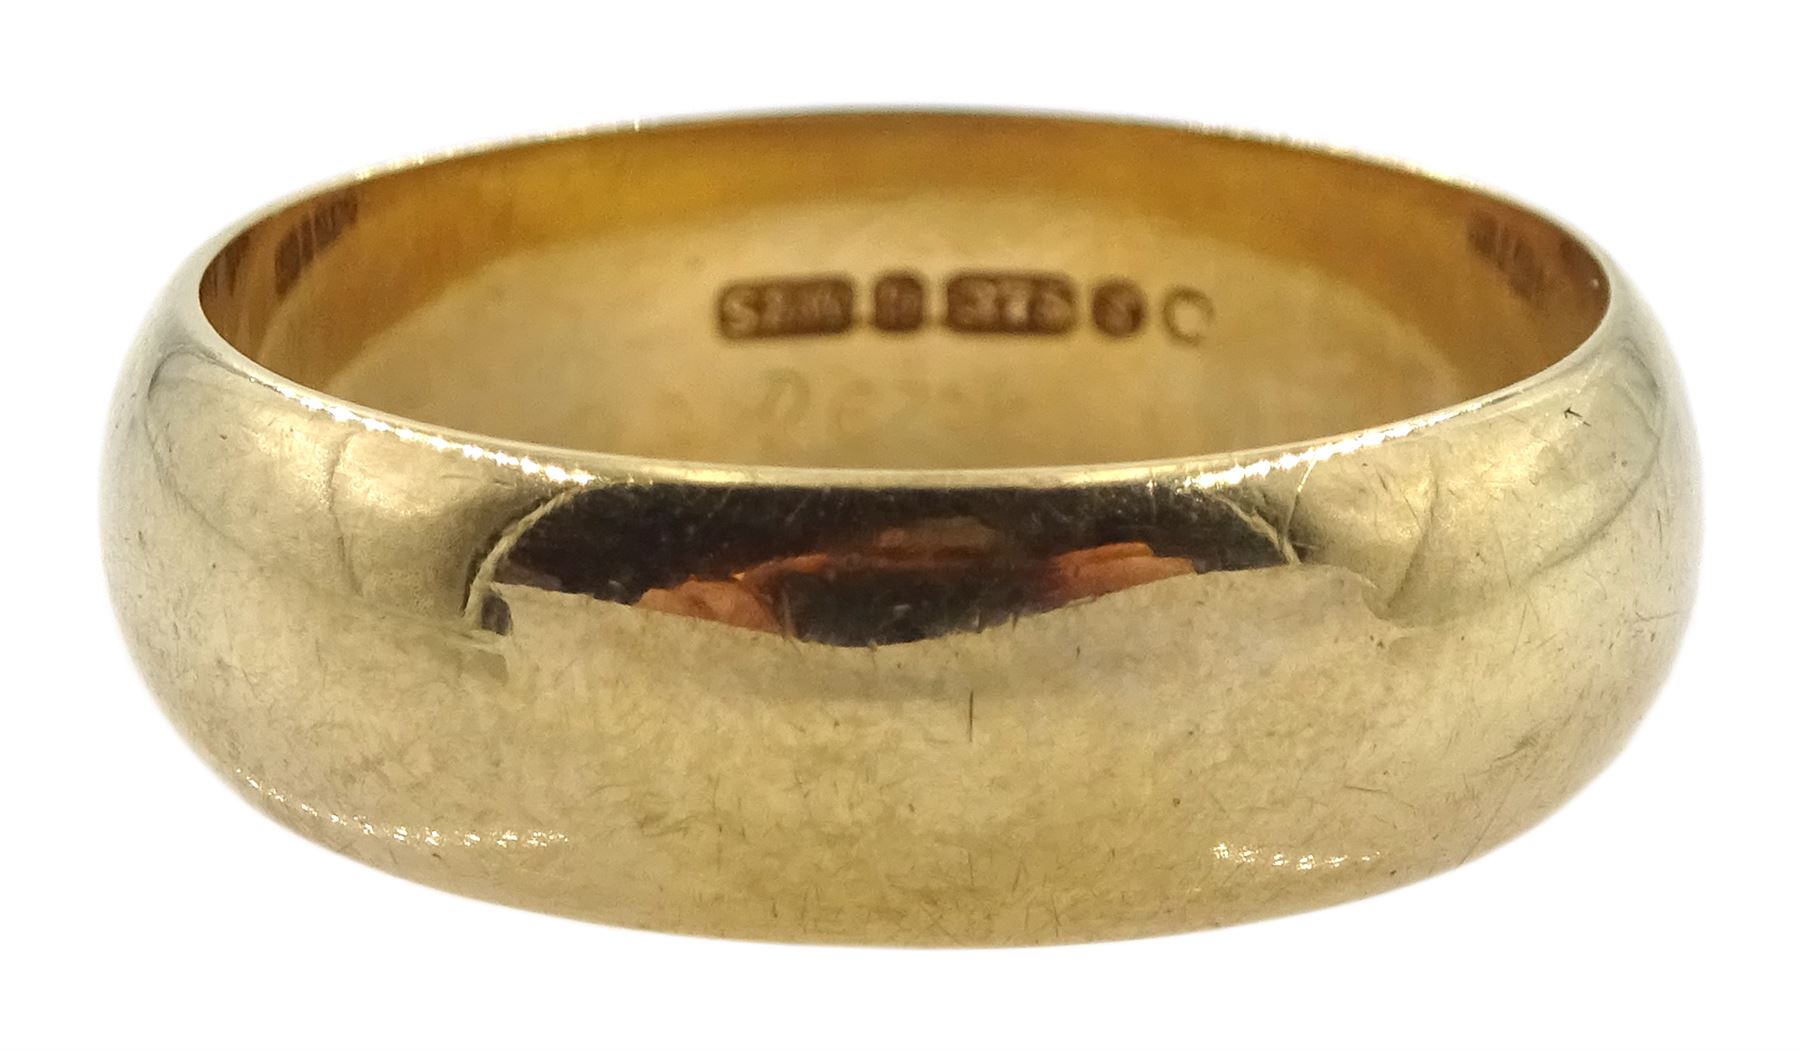 9ct gold wedding band, London 1973 - Jewellery, Watches & Silver